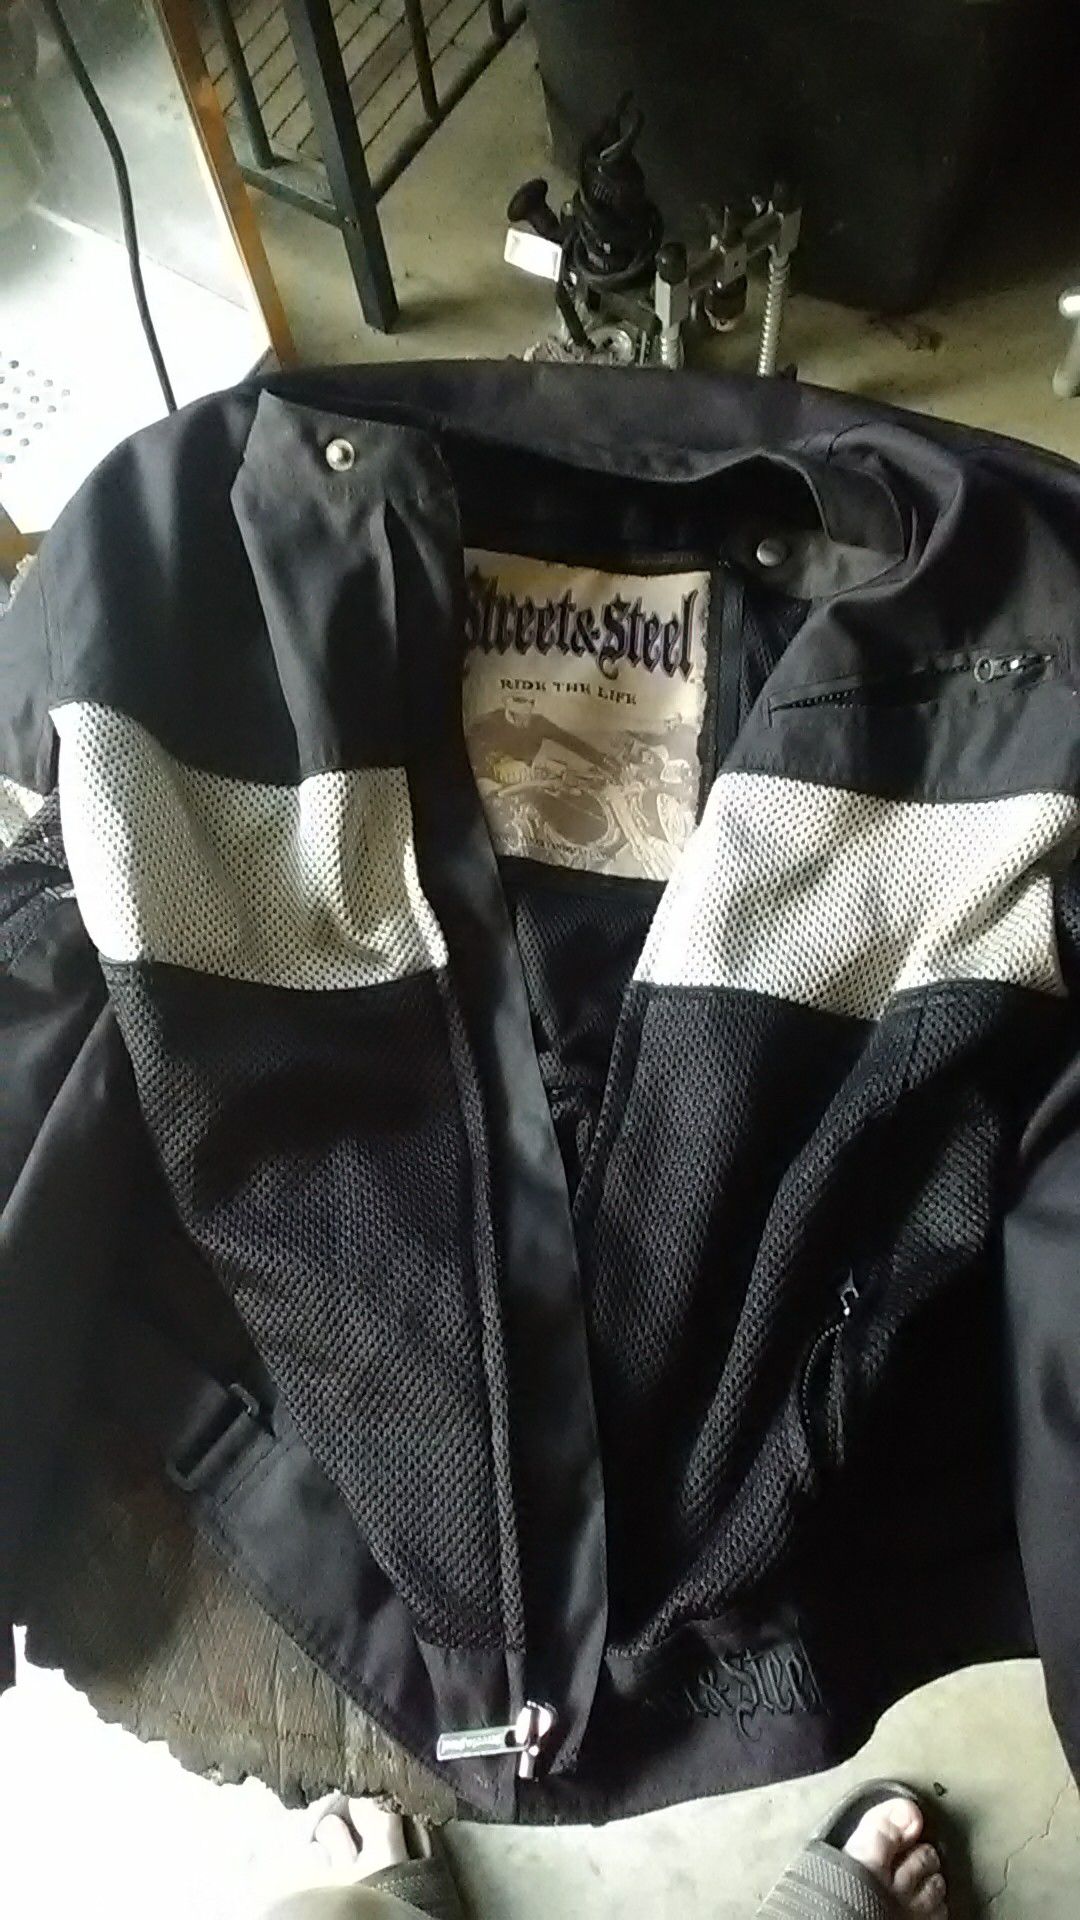 Street and steel motorcycle jackets